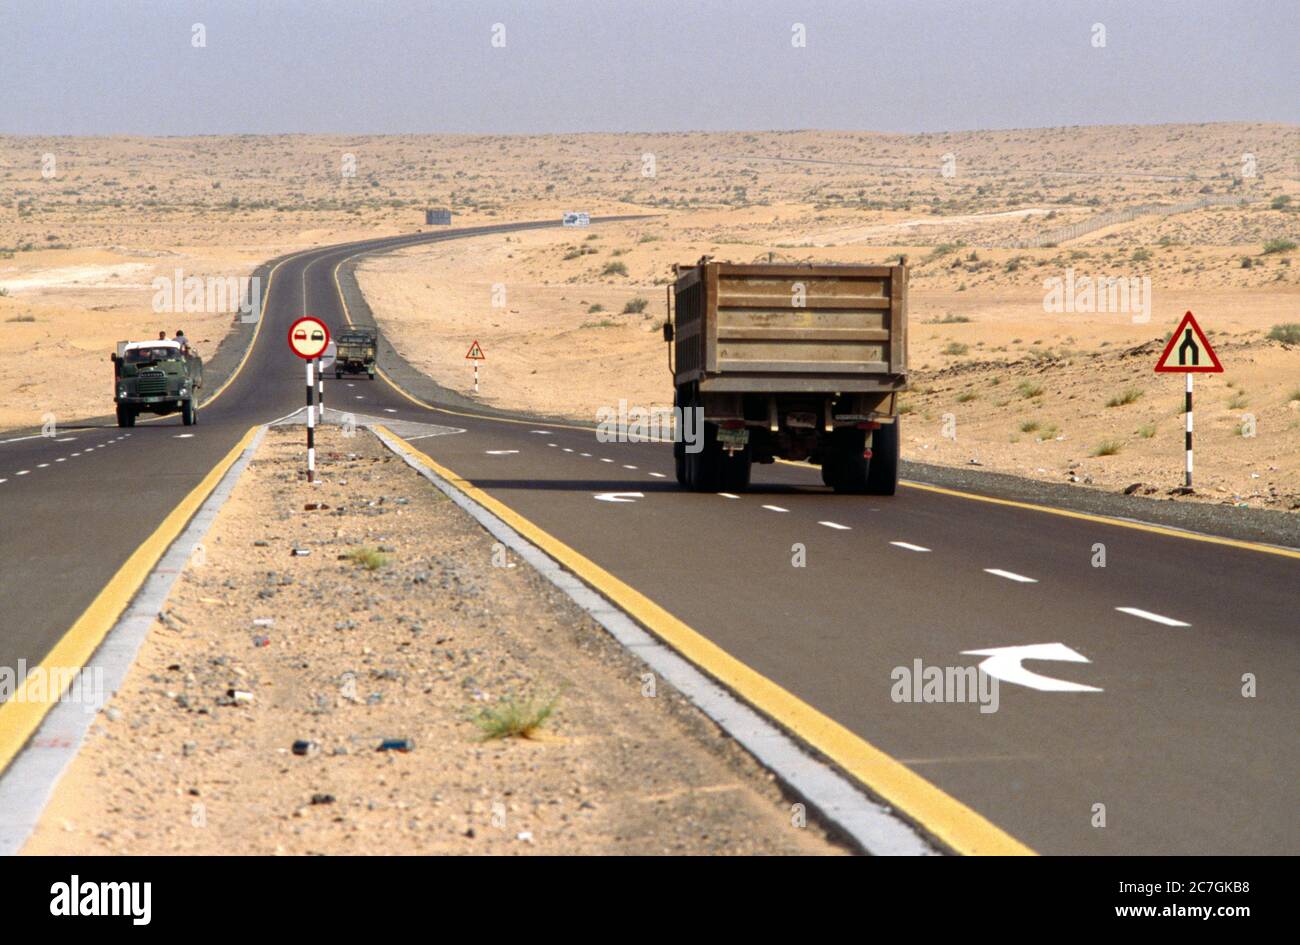 Dubai UAE Rubbish On The Side Of The Road In The Desert at the End of Dual Carriageway Stock Photo